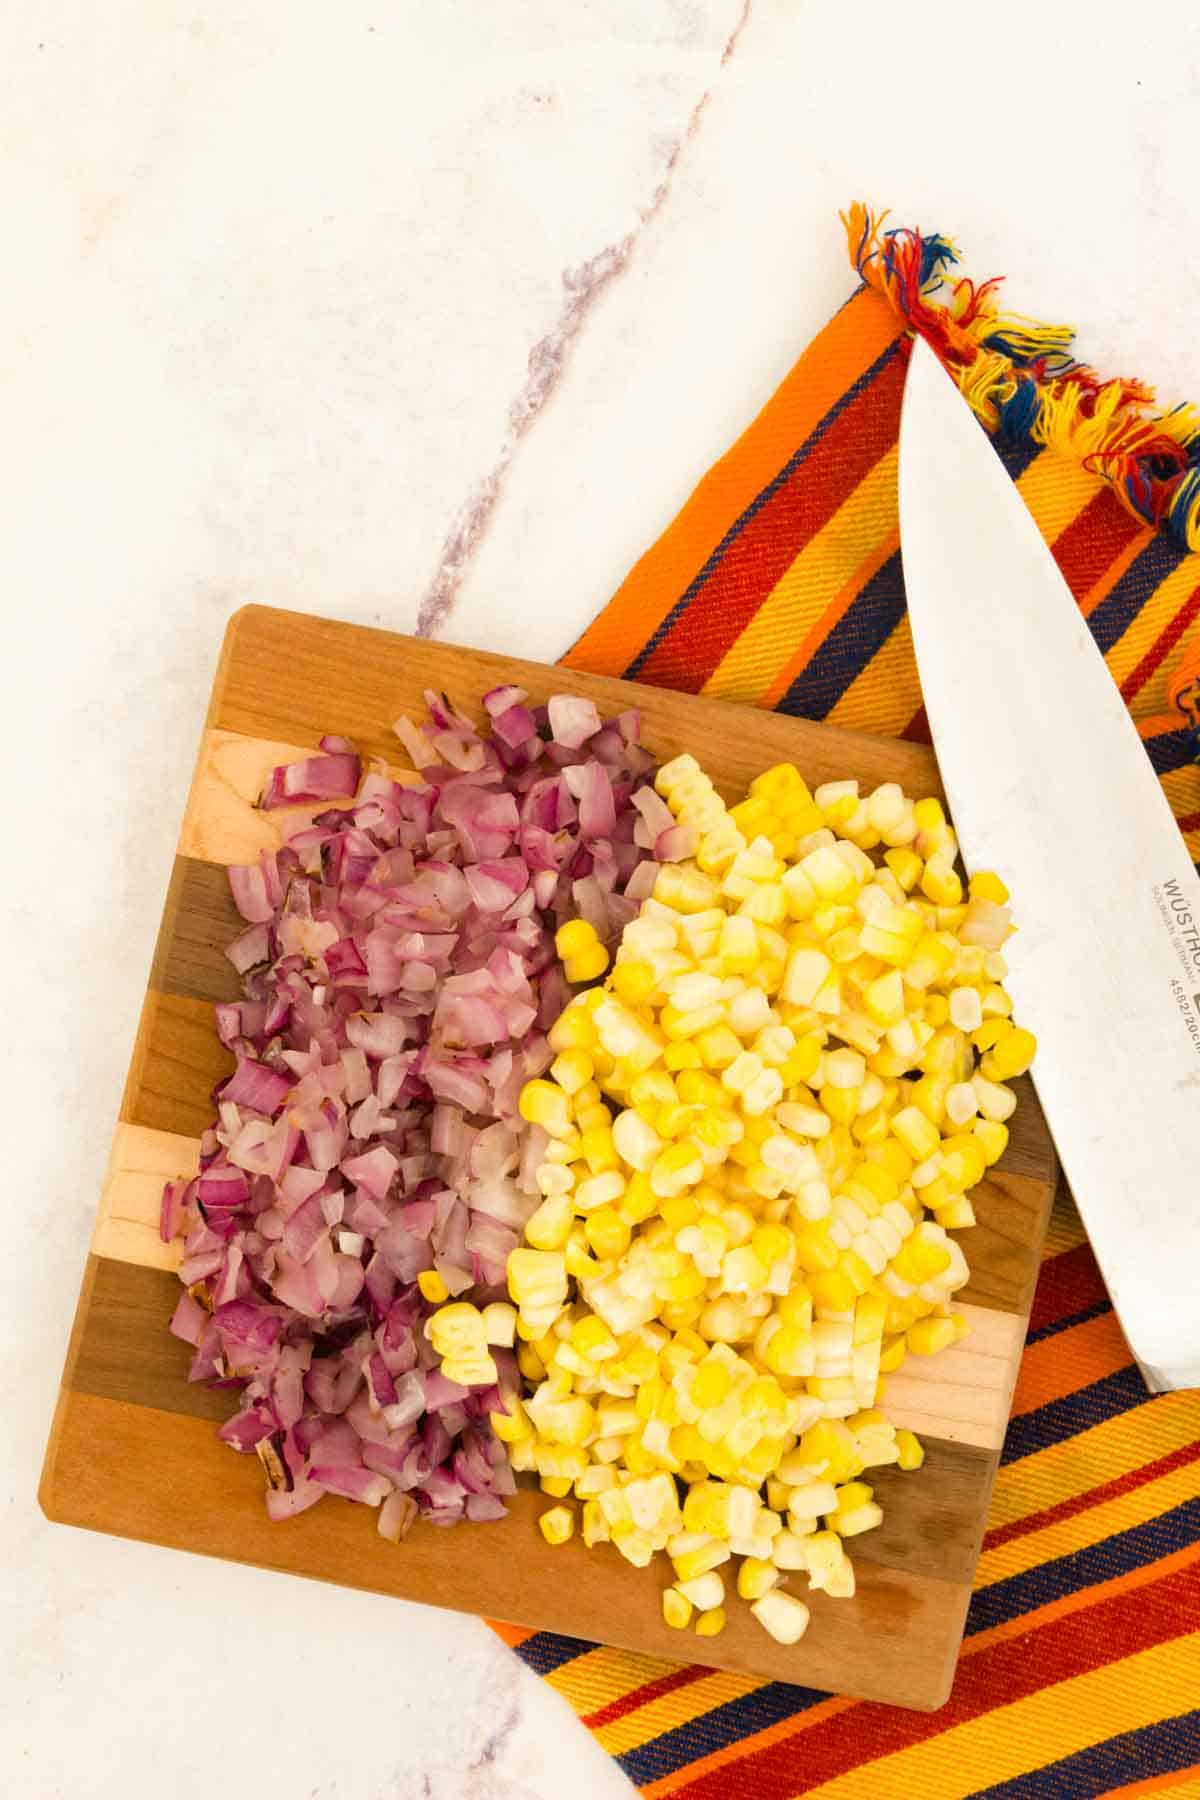 Chopped onions and corn with a knife on a cutting board.